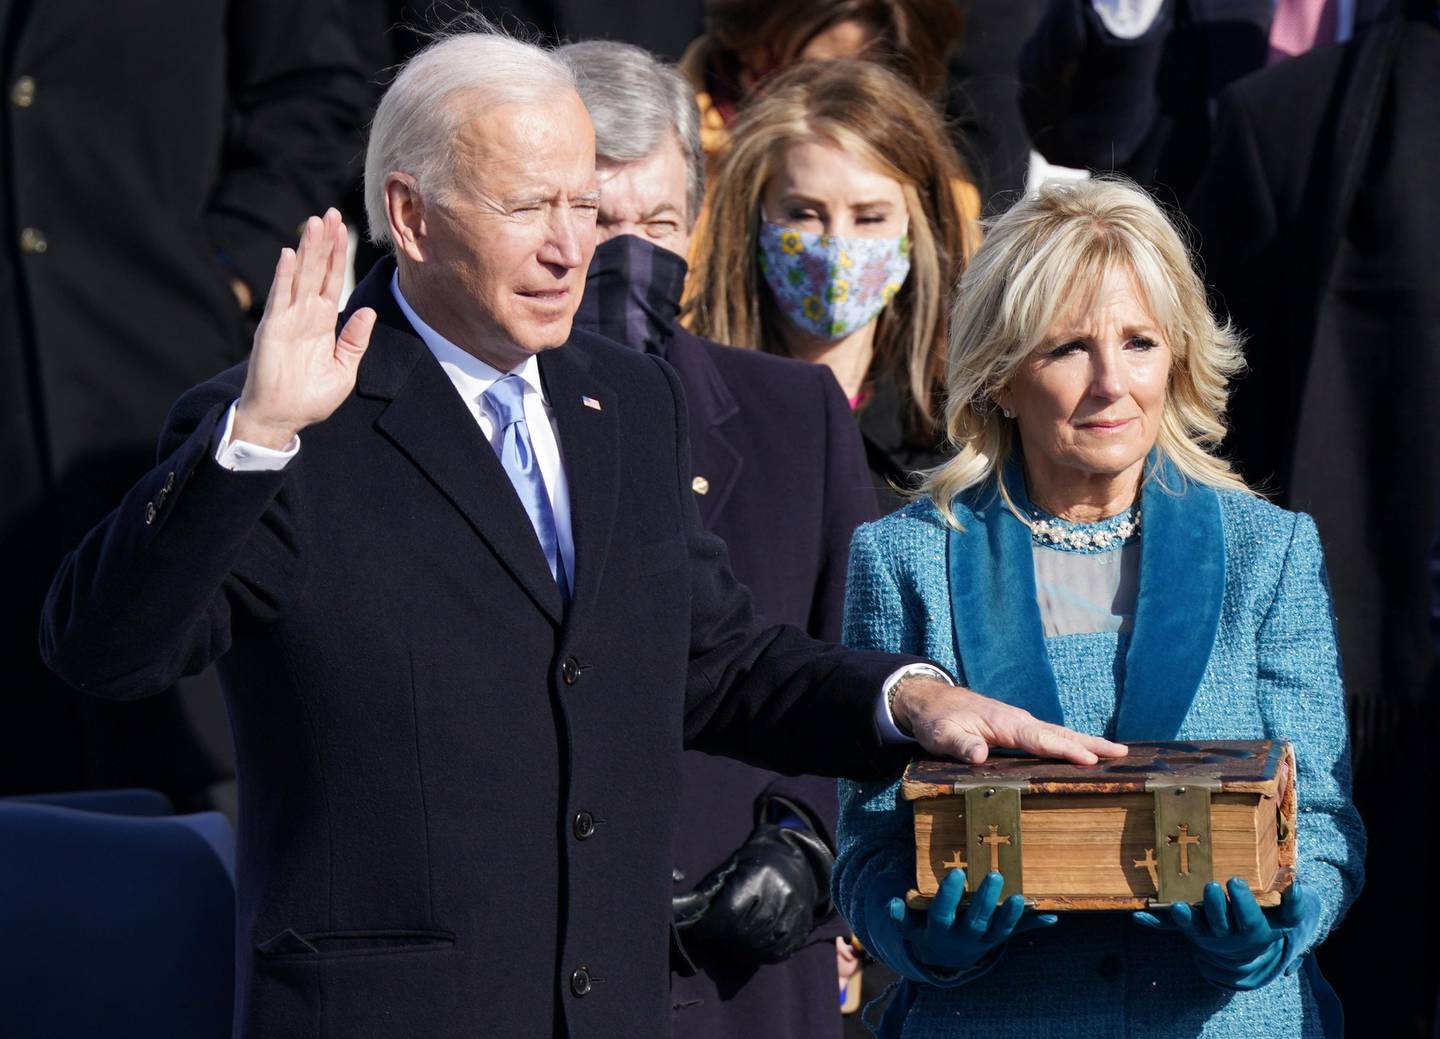 Joe Biden is sworn in as the 46th President of the United States on the West Front of the U.S. Capitol in Washington, U.S., January 20, 2021. REUTERS/Kevin Lamarque